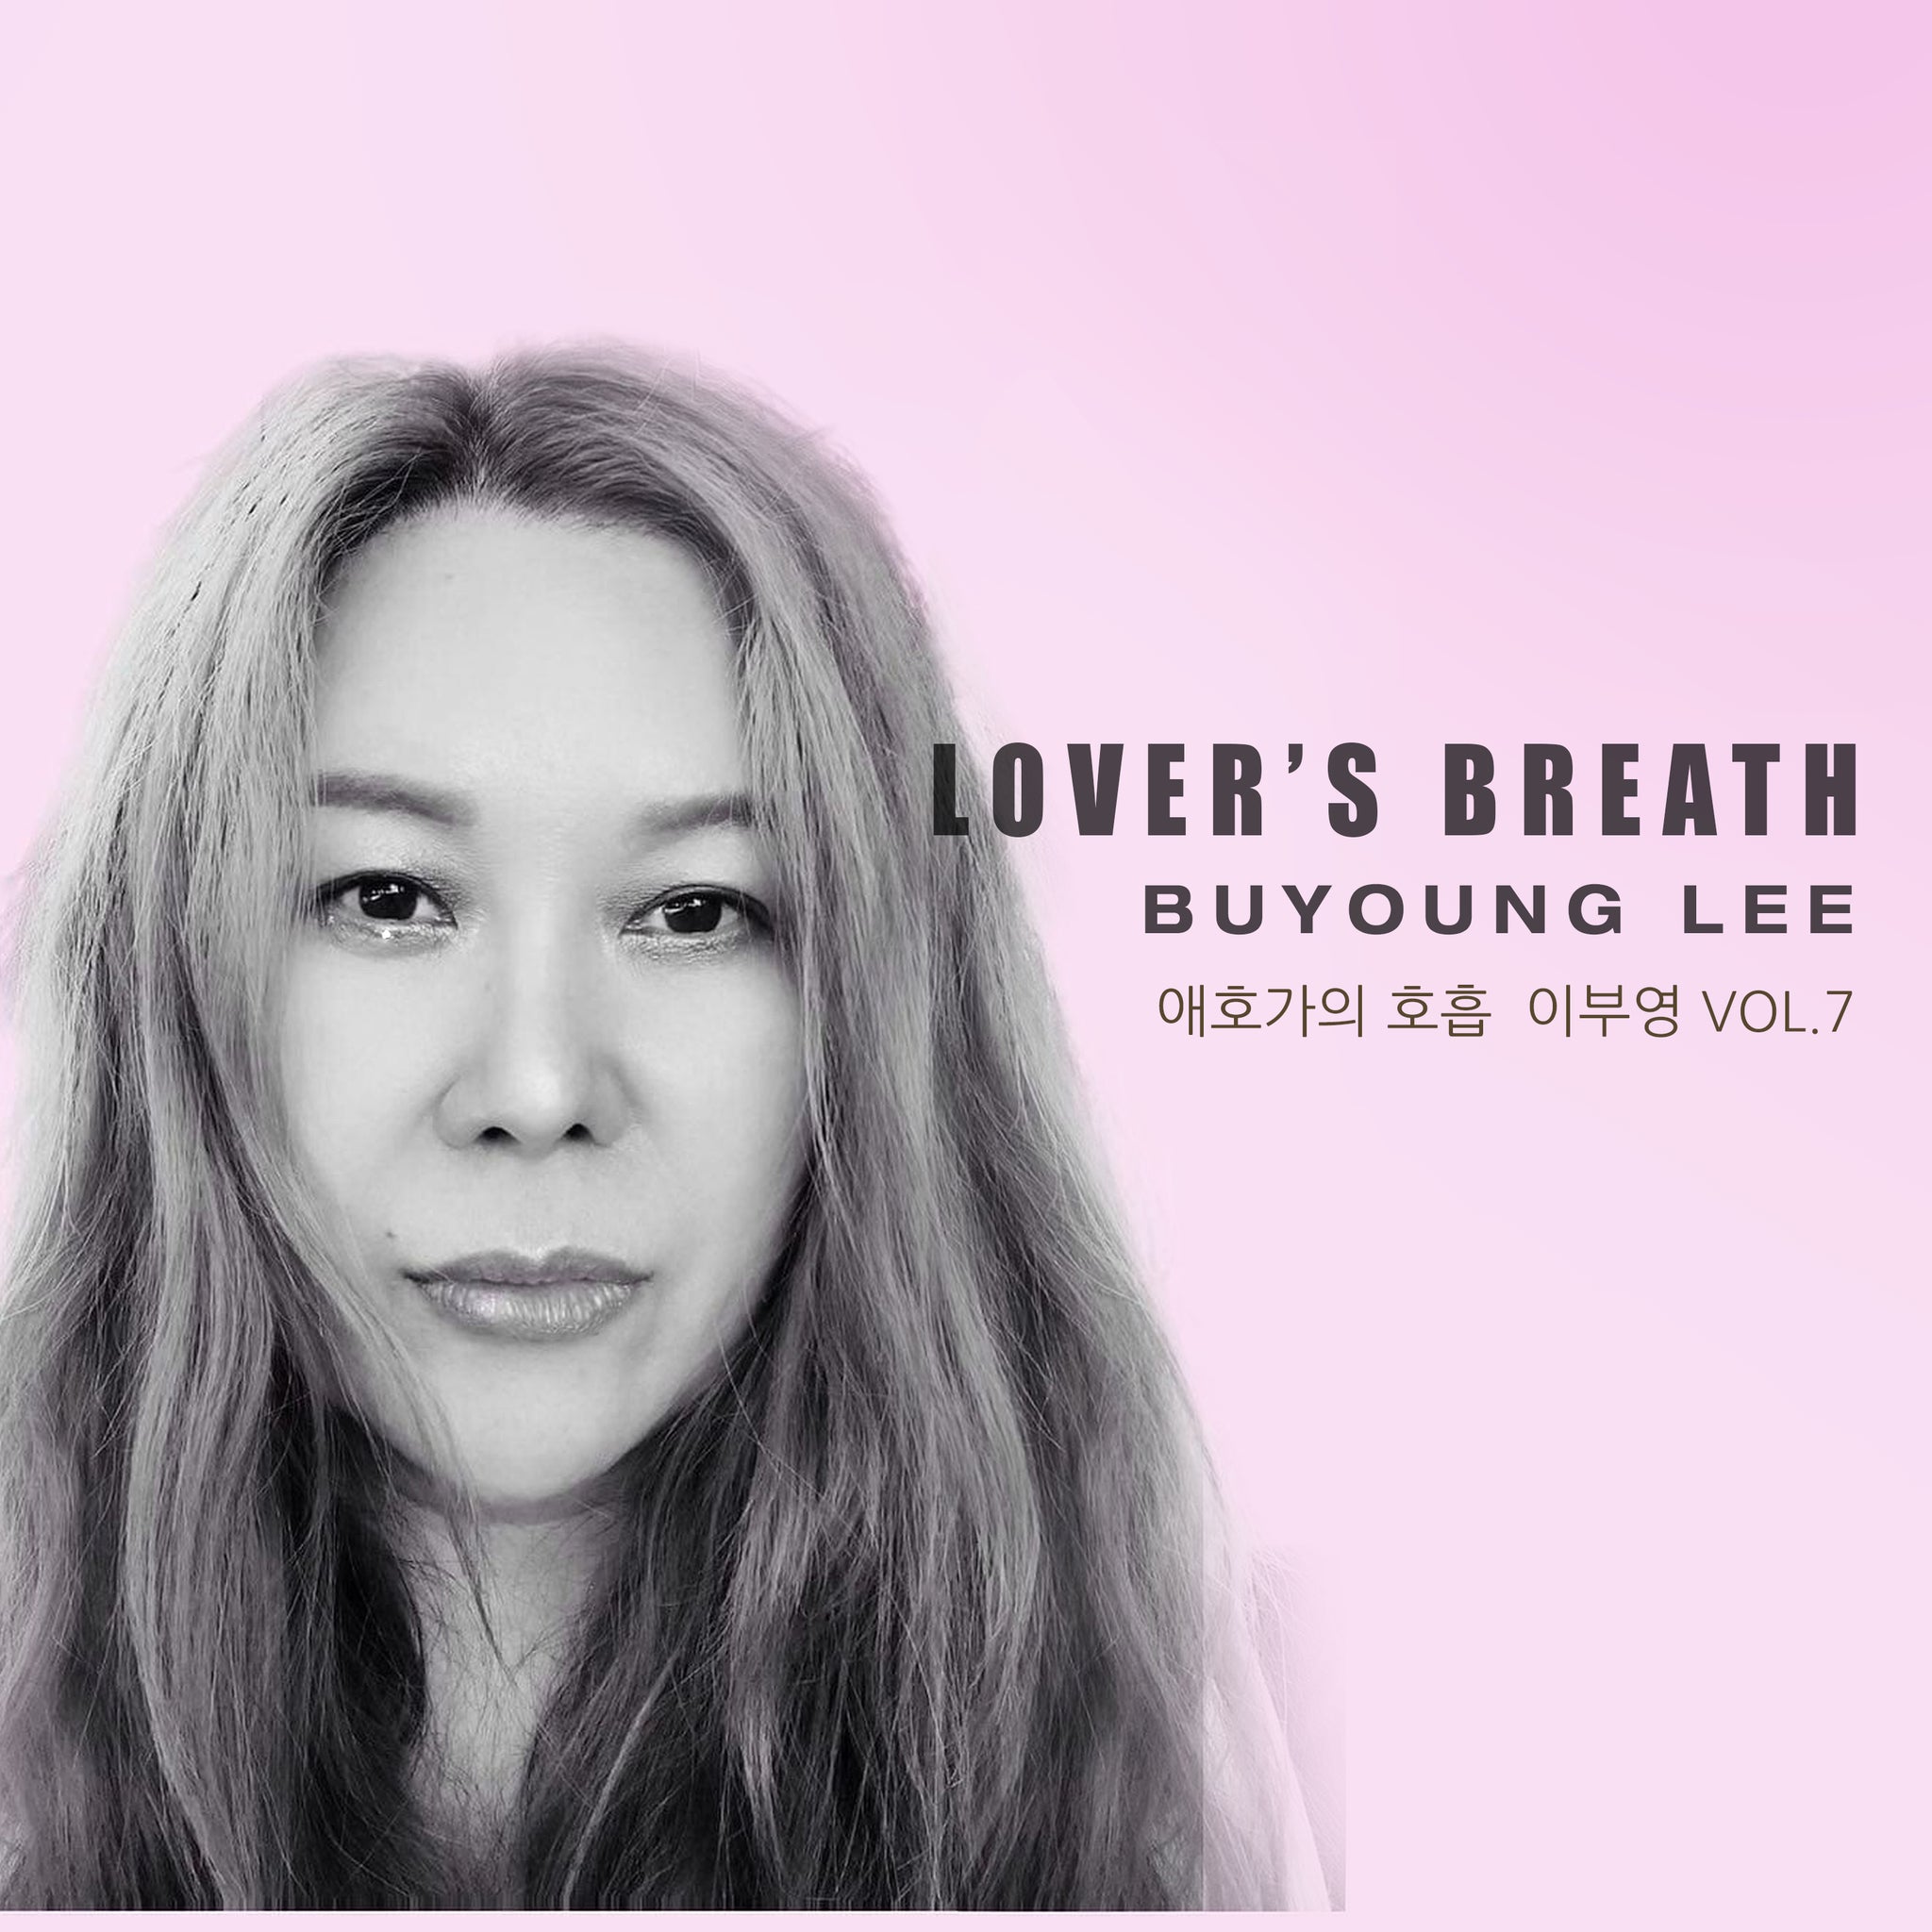 LEE BU YOUNG - LOVER'S BREATH